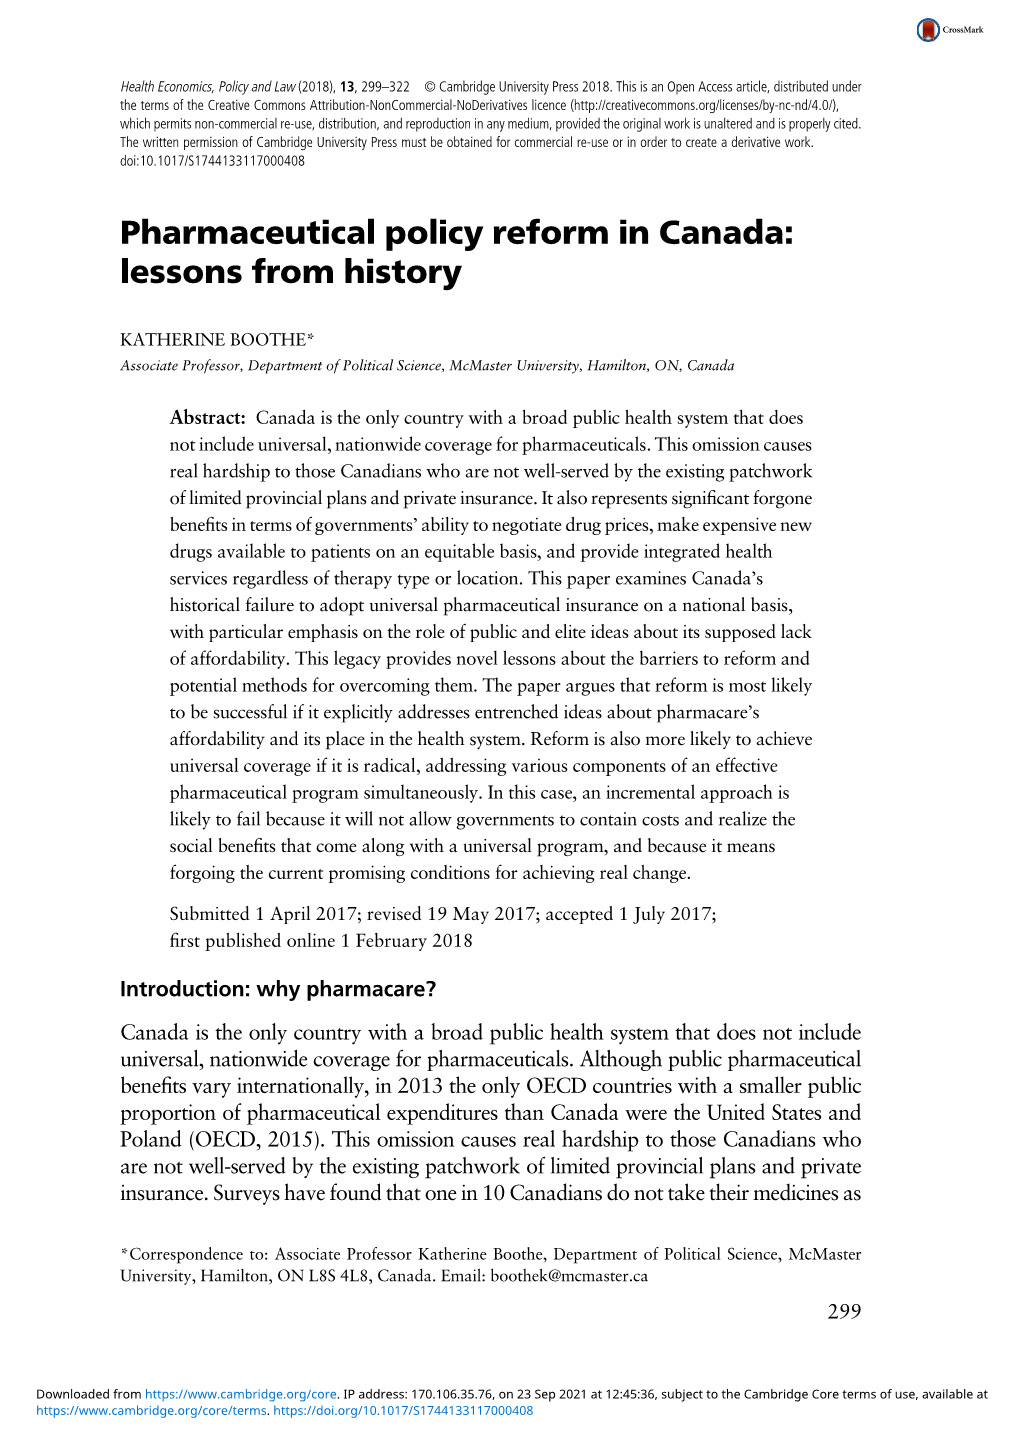 Pharmaceutical Policy Reform in Canada: Lessons from History